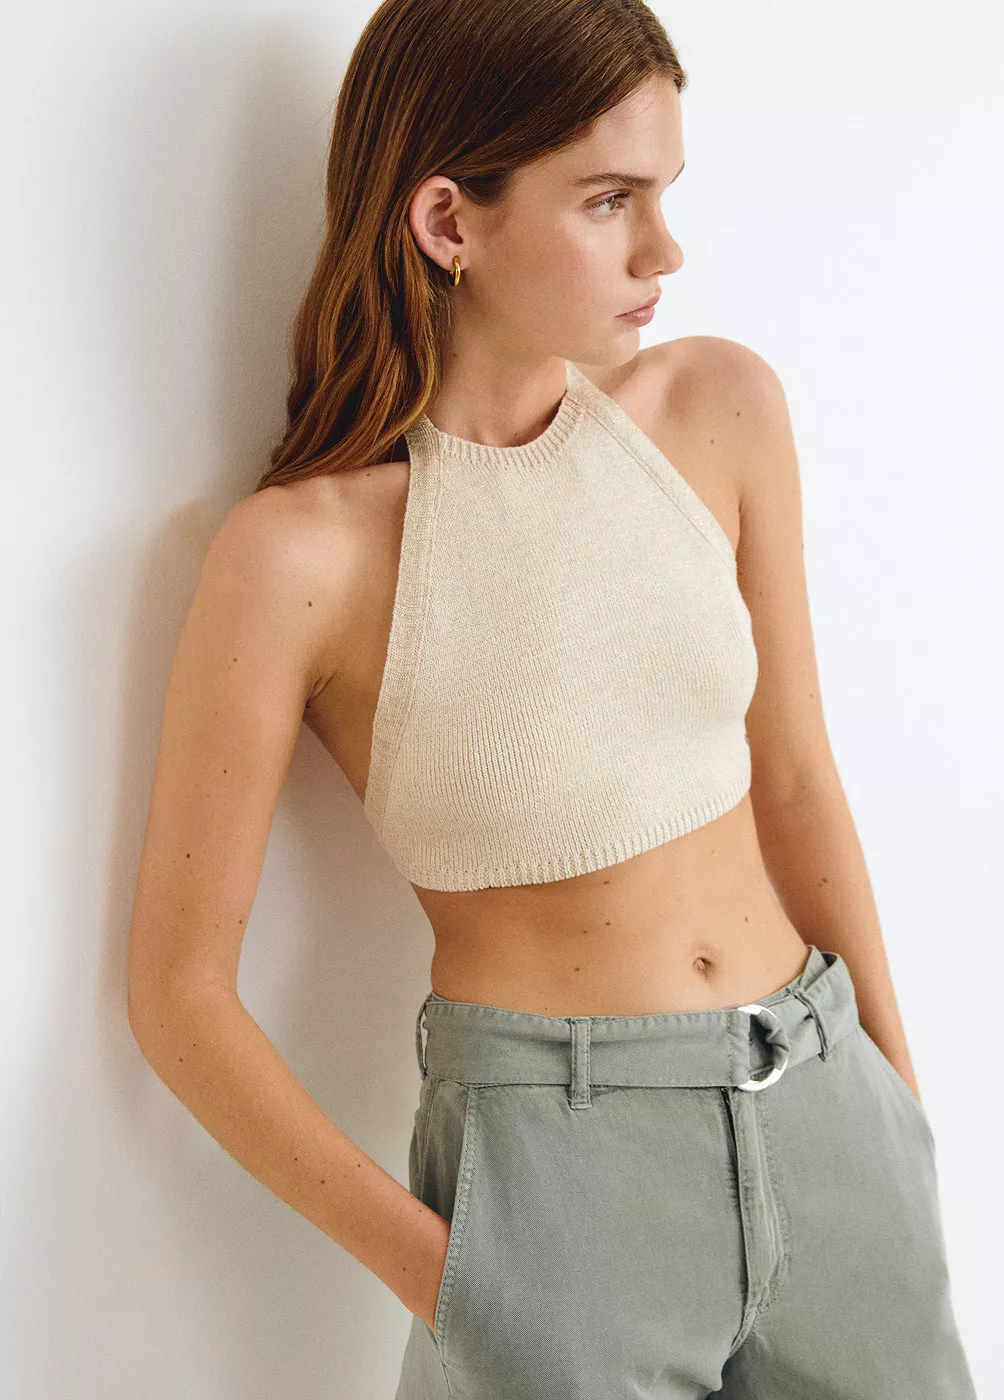 Tie-up knit top